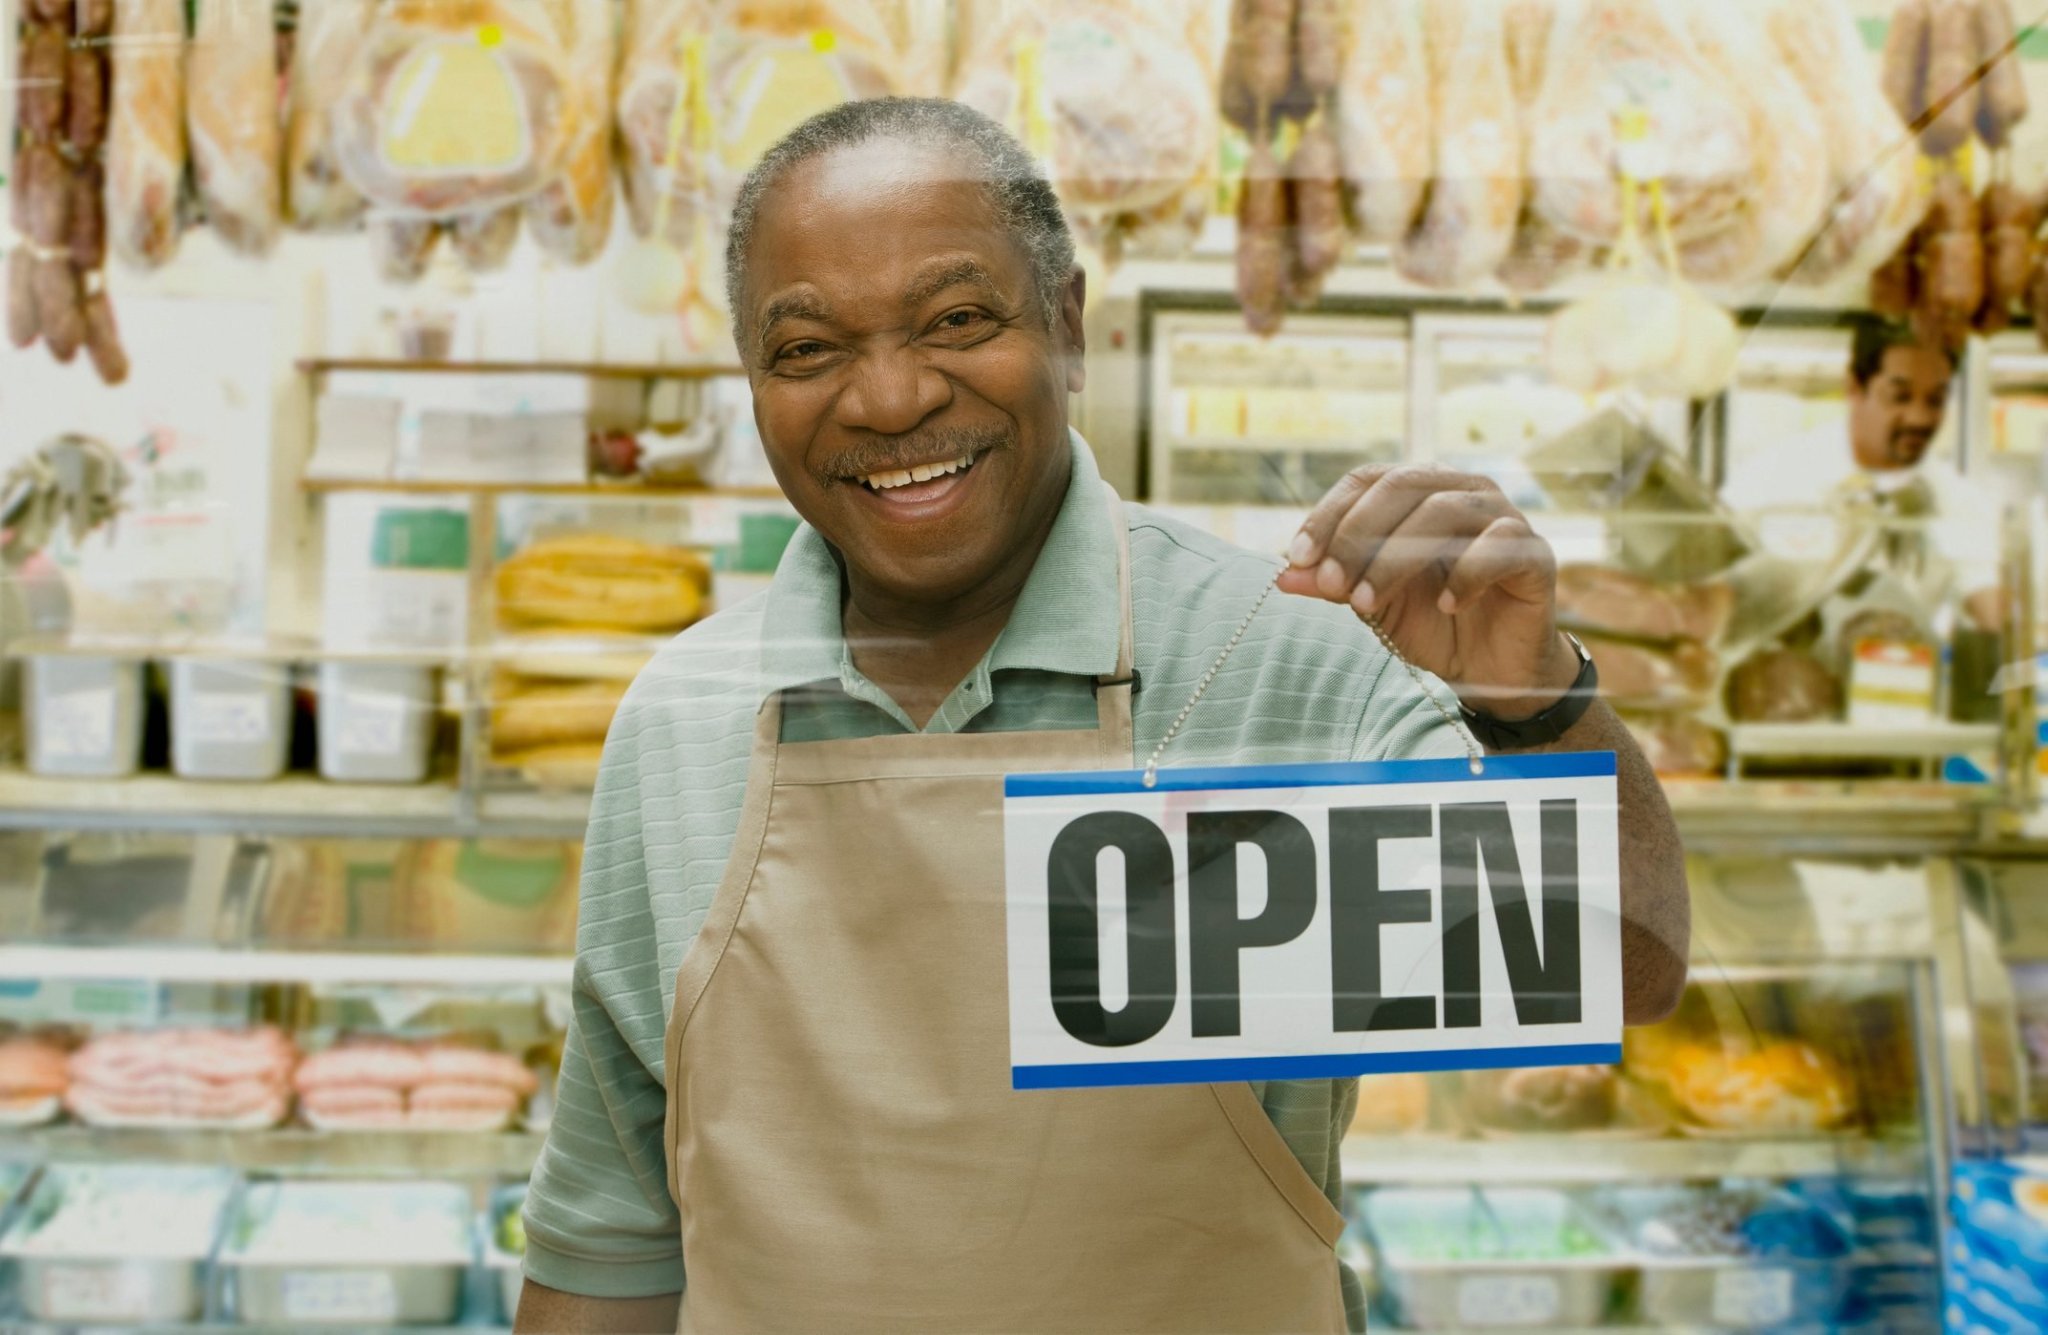 6 Ways to Support Black-Owned Businesses